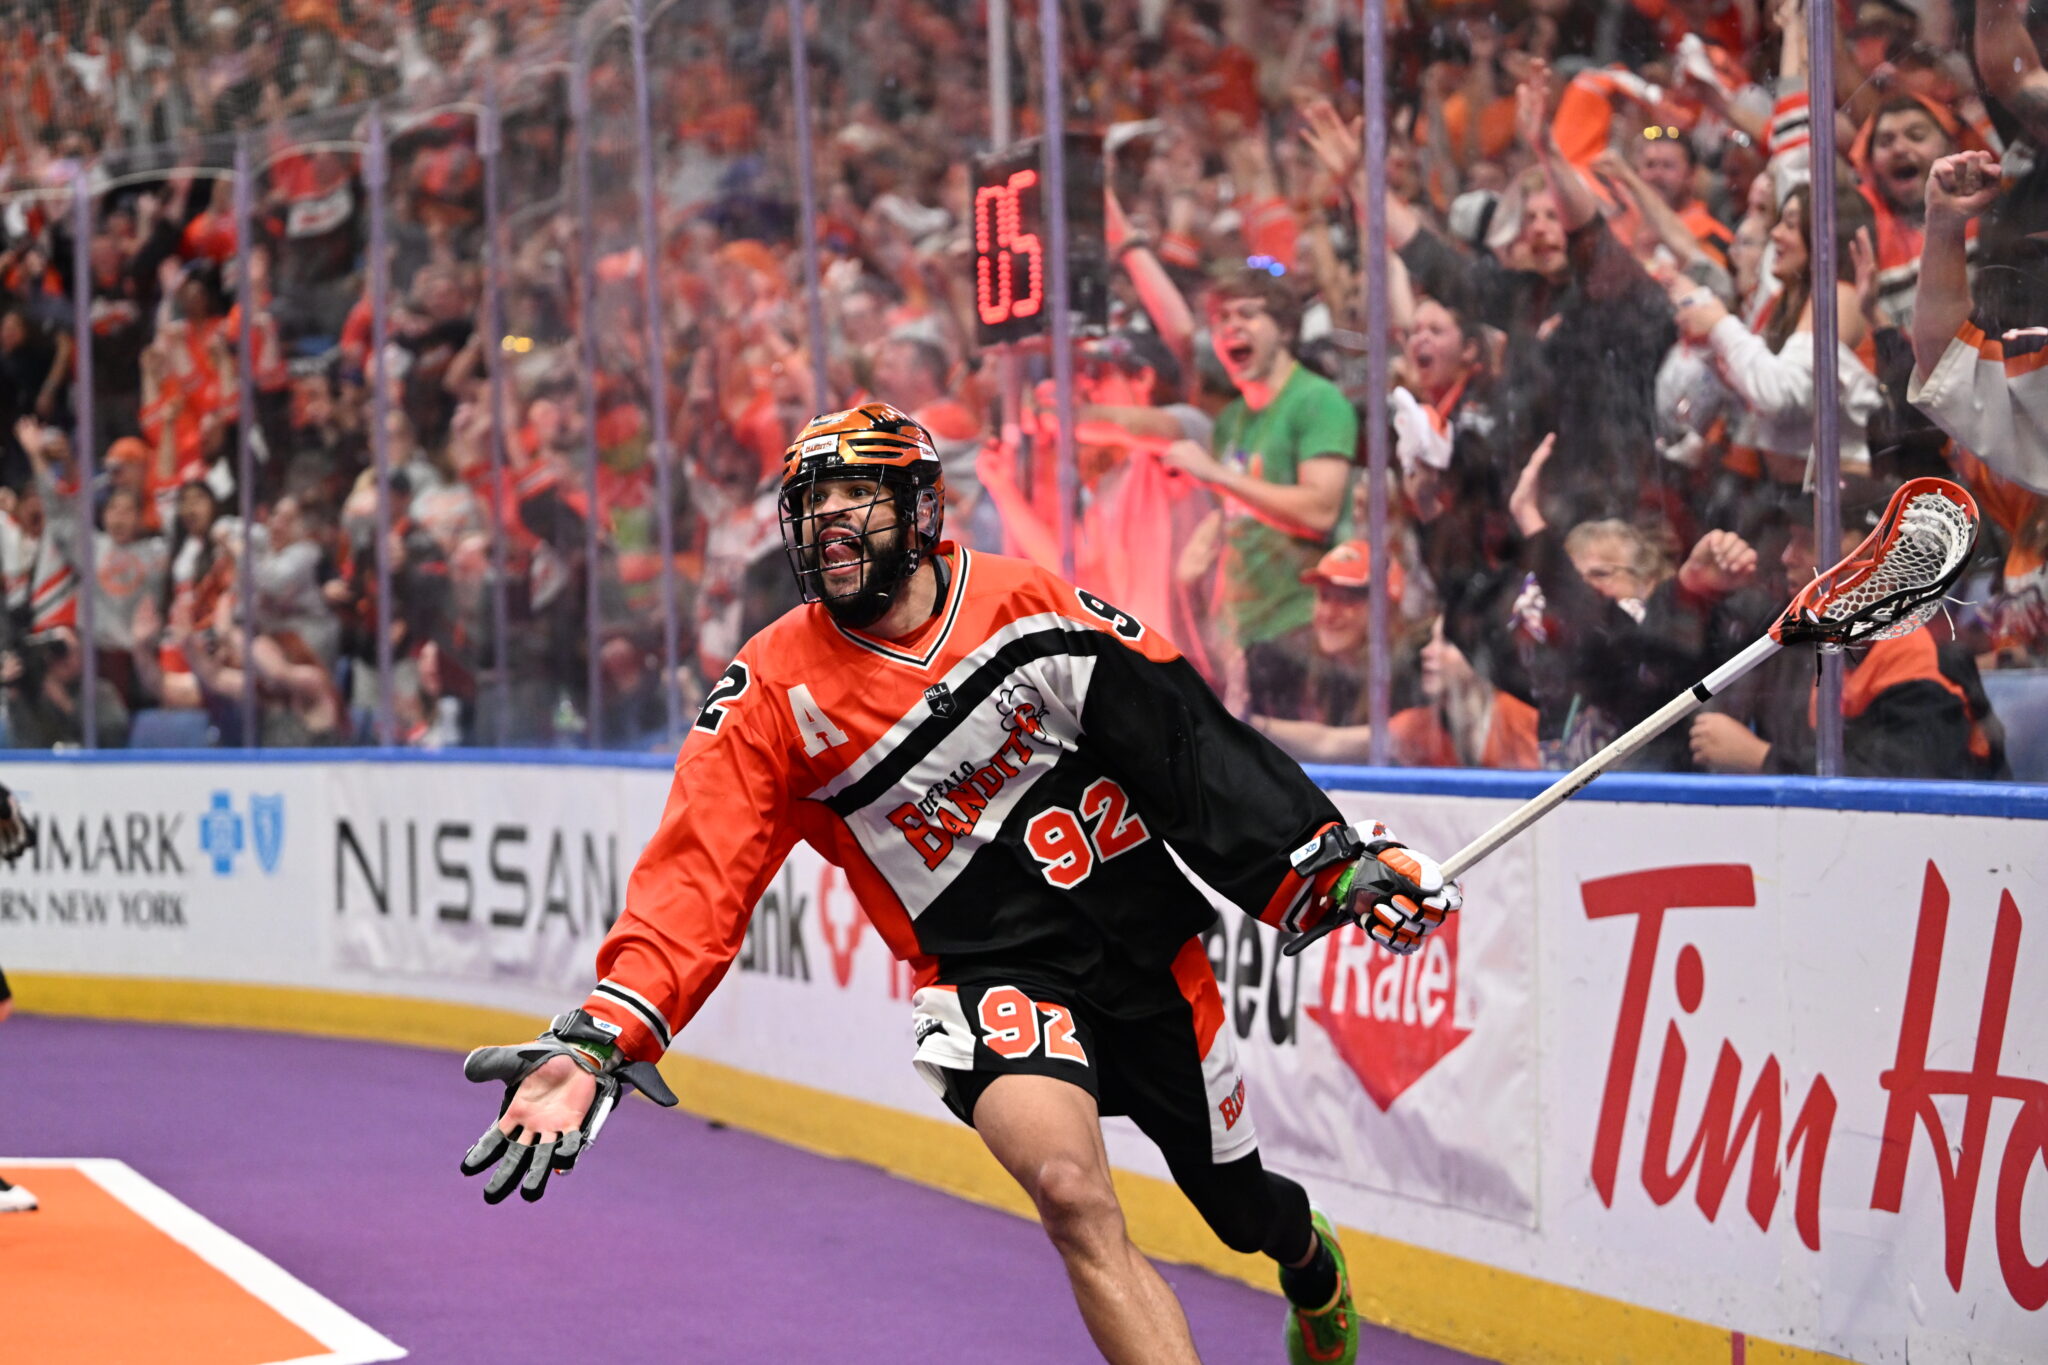 Dhane Smith celebrates a goal in the NLL finals